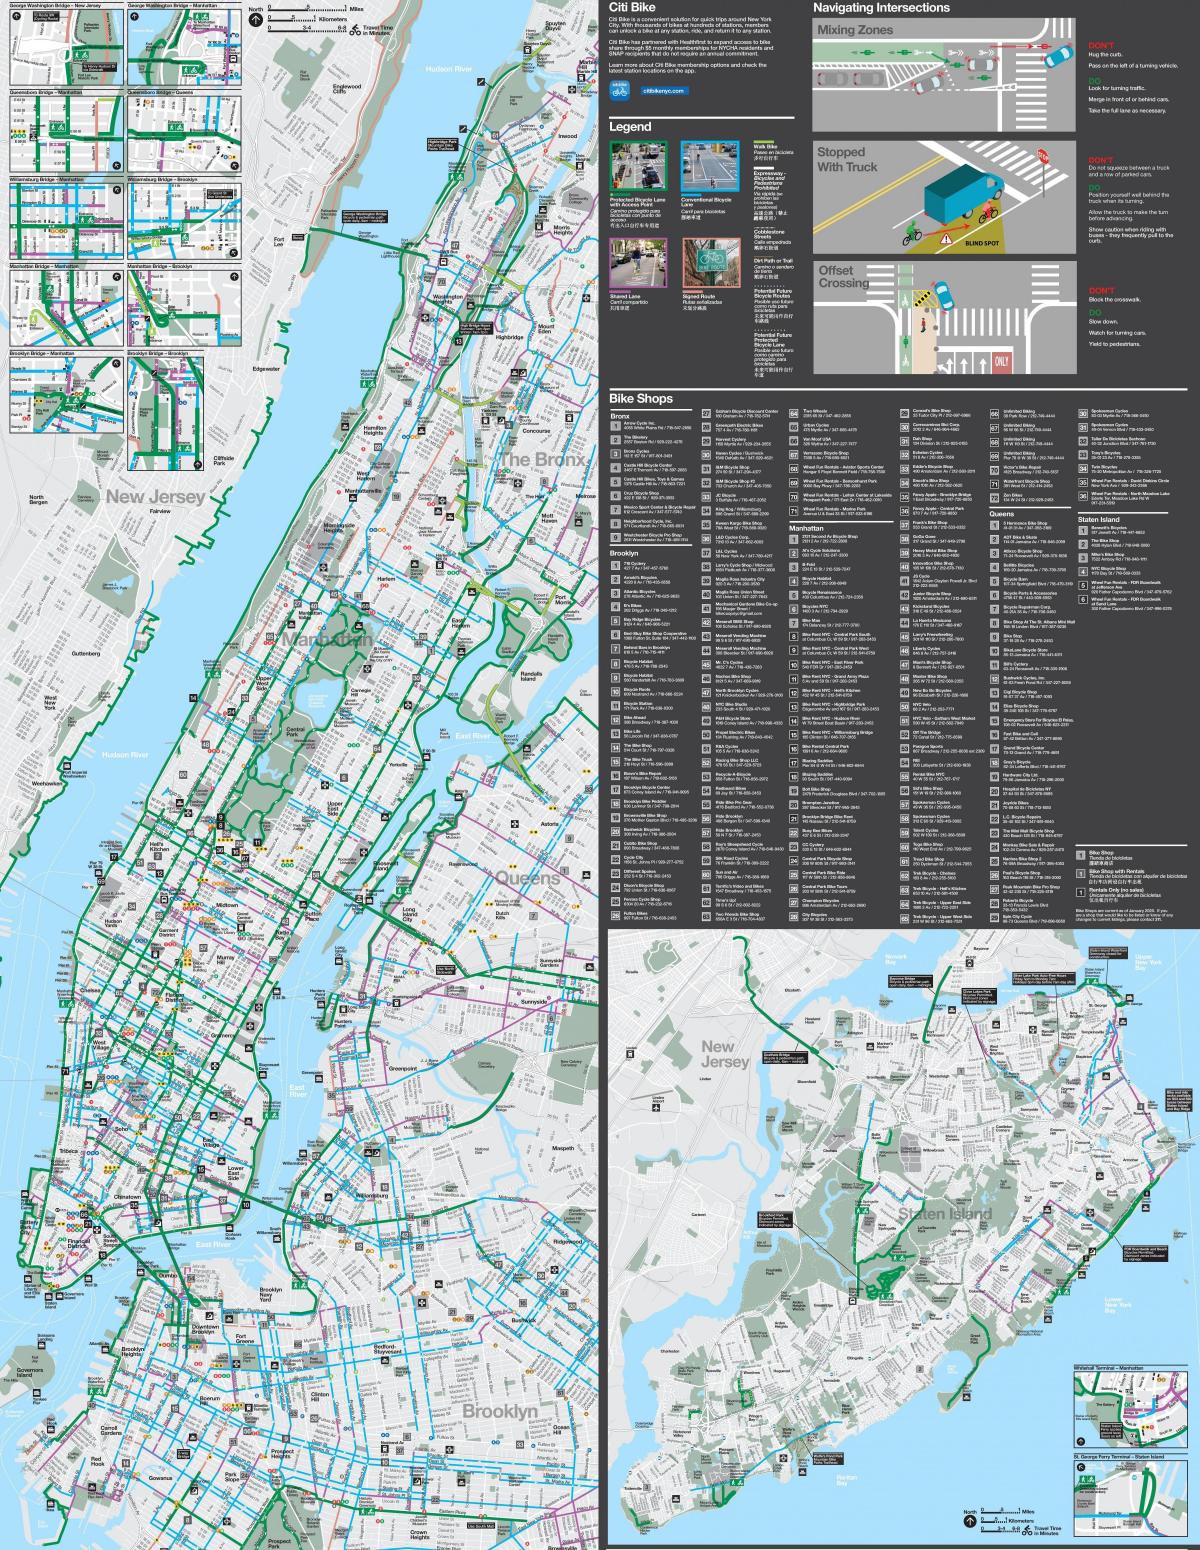 NYC cycling map